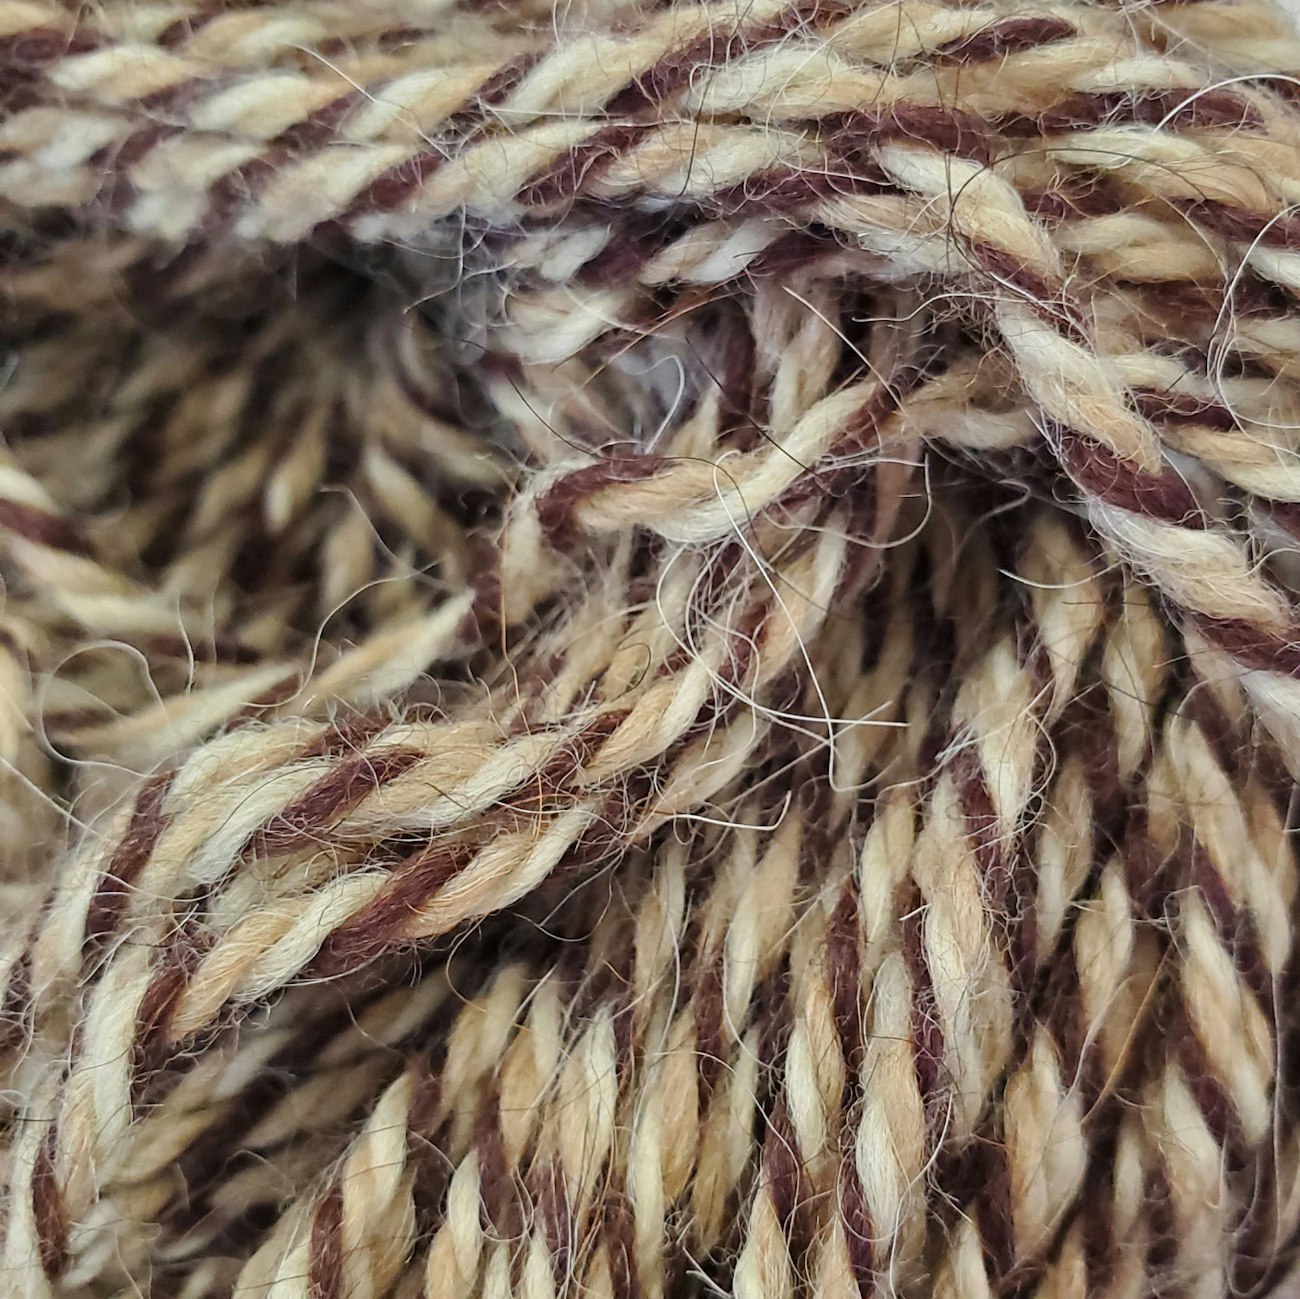 3-ply yarn in white, brown, and tan, with guard hairs